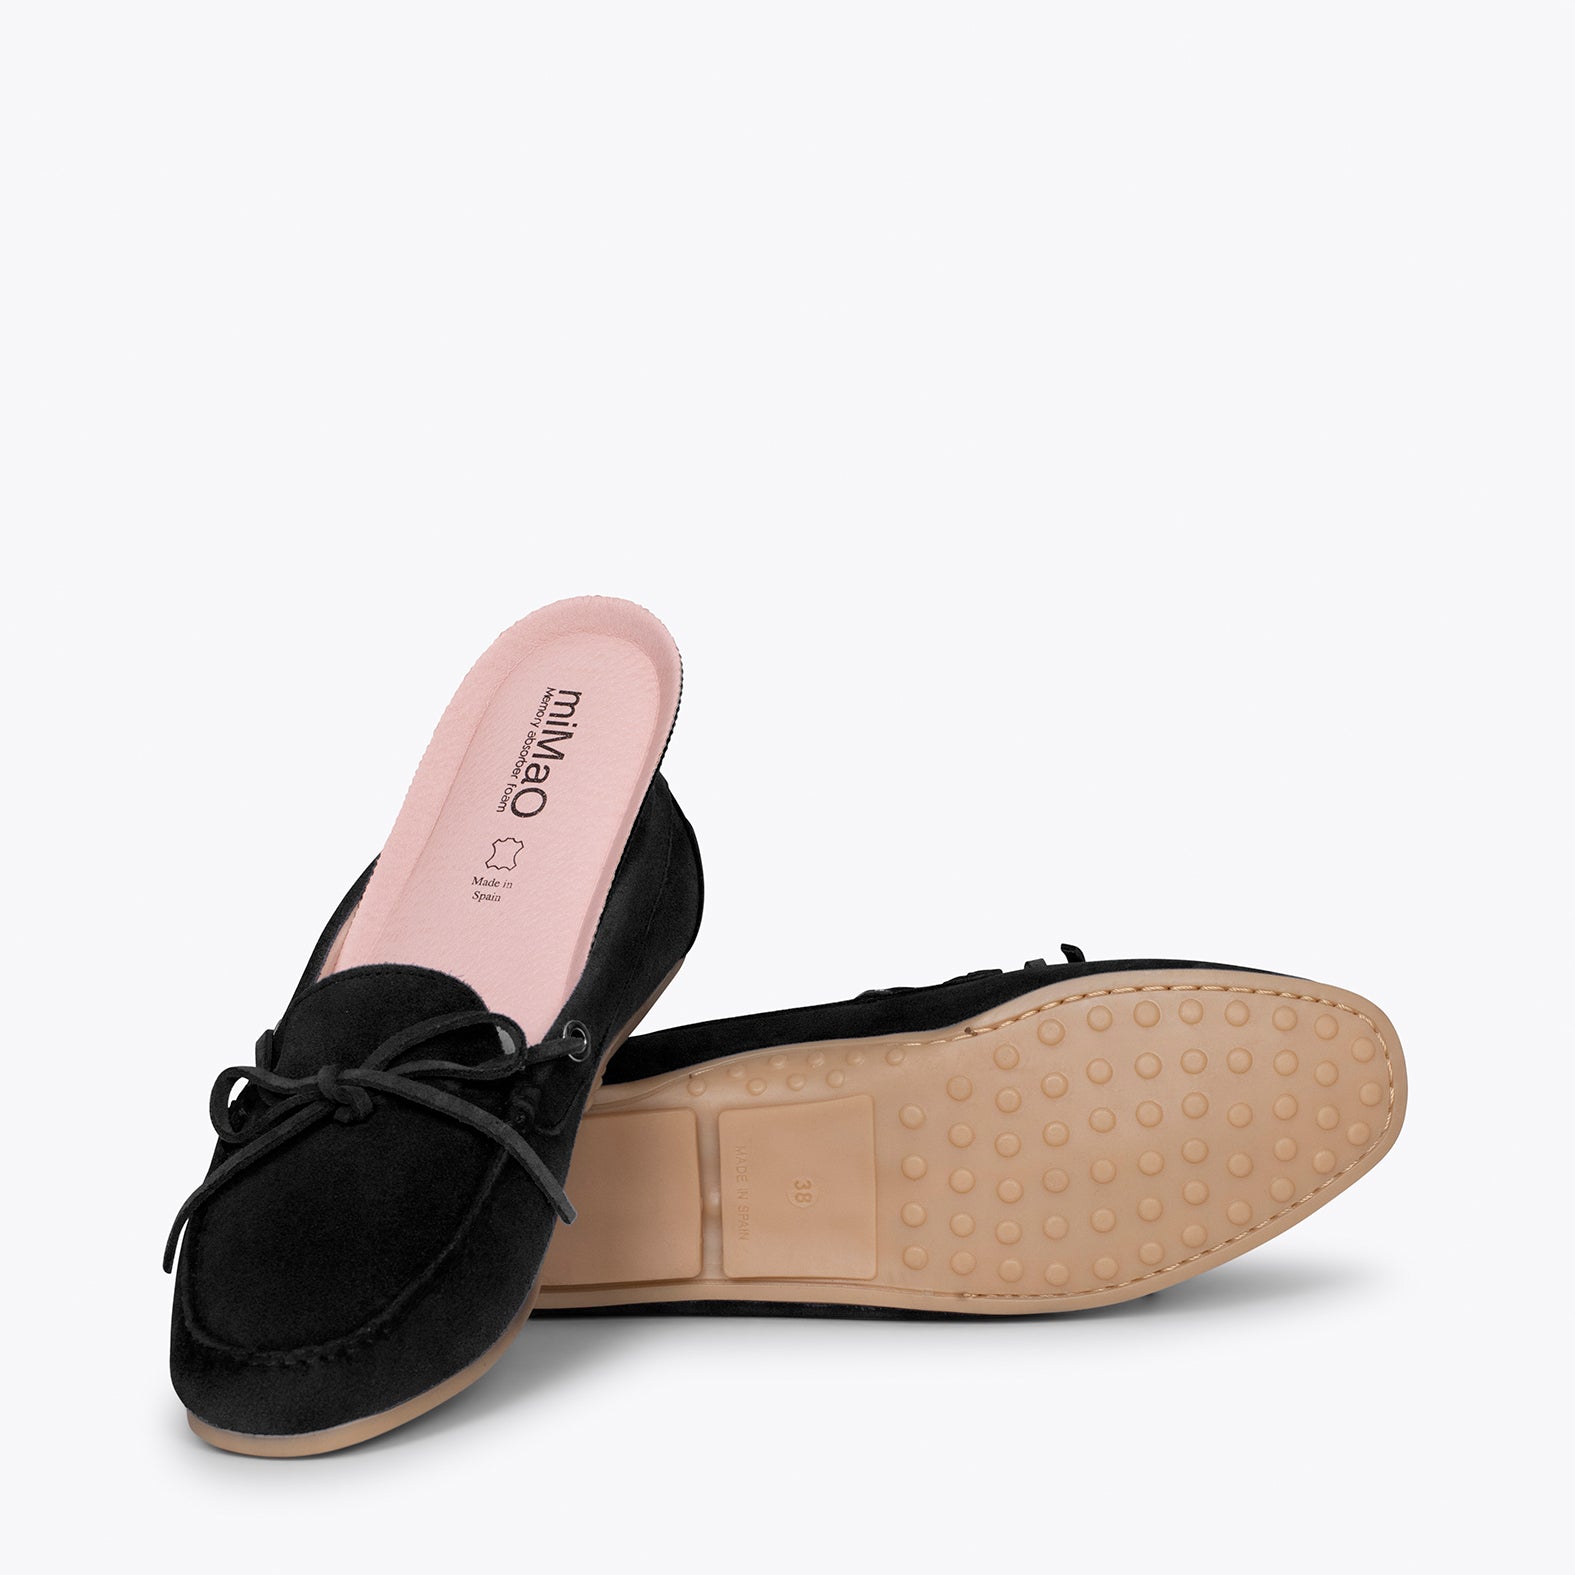 LACE – BLACK moccasins with removable insole